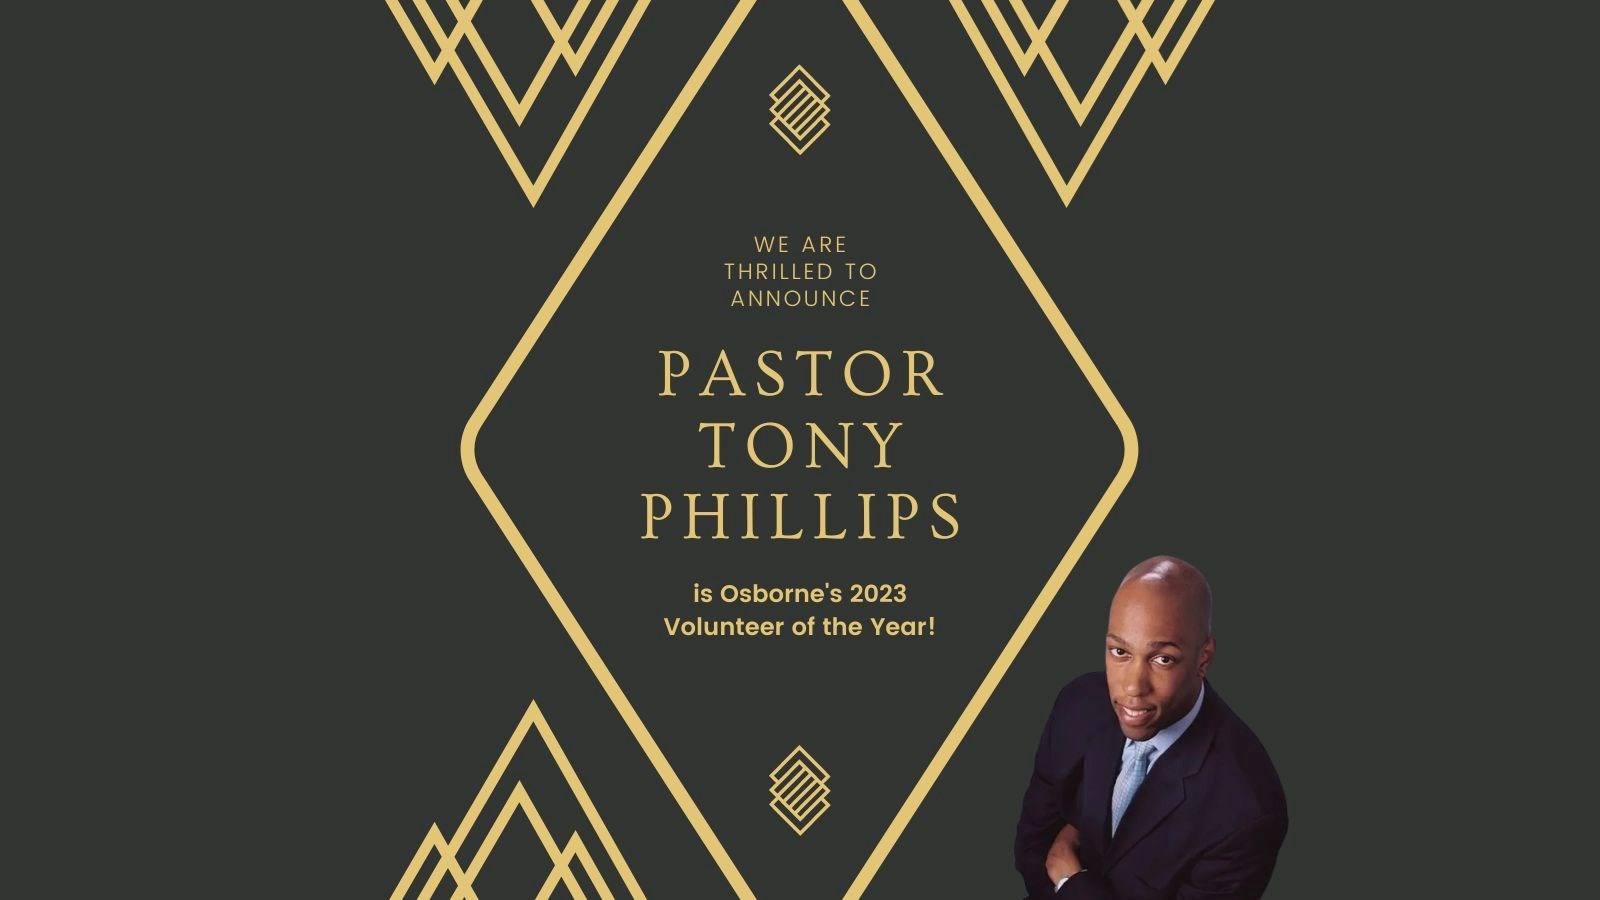 We are thrilled to announce Pastor Tony Phillips is Osborne's 2023 Volunteer of the Year!